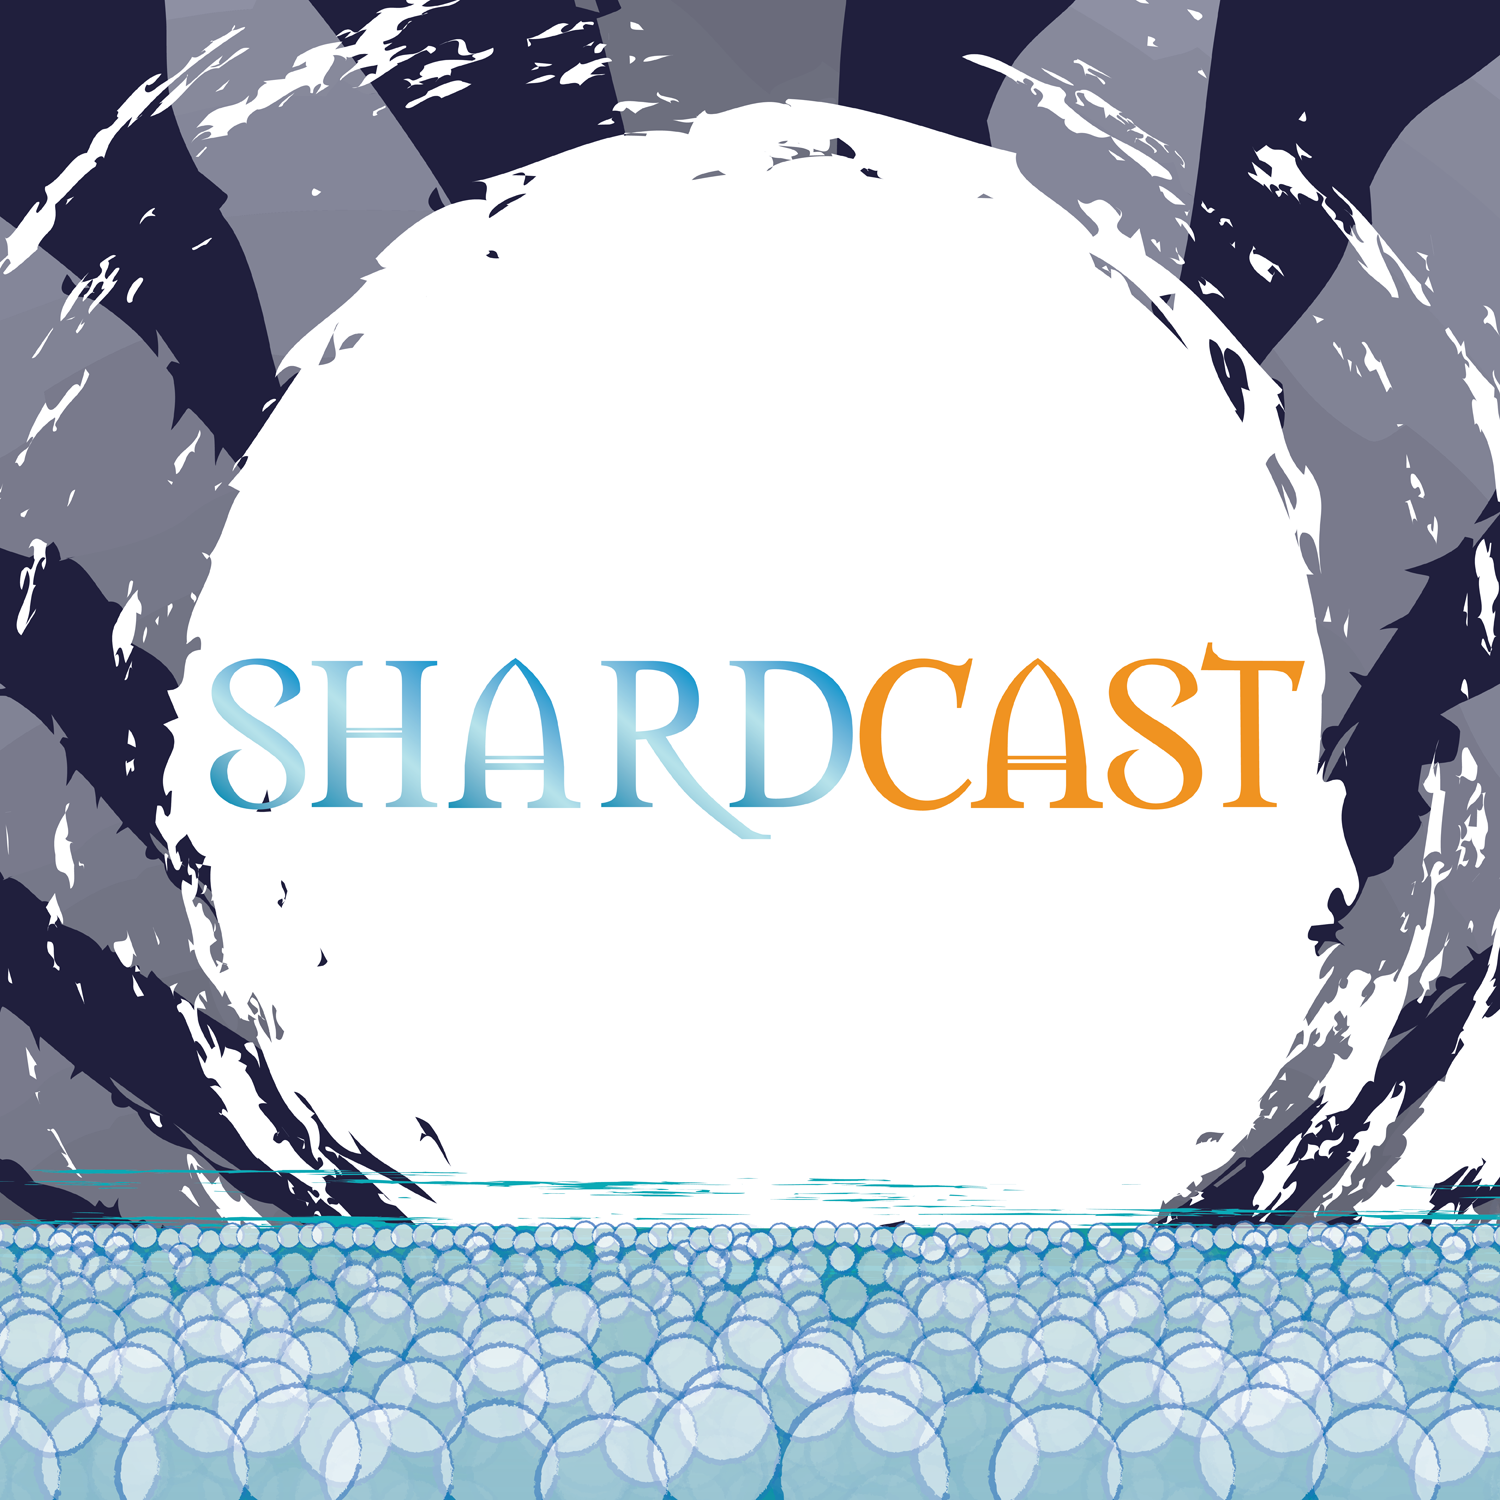 More information about "Shardcast: The Dawnshards"